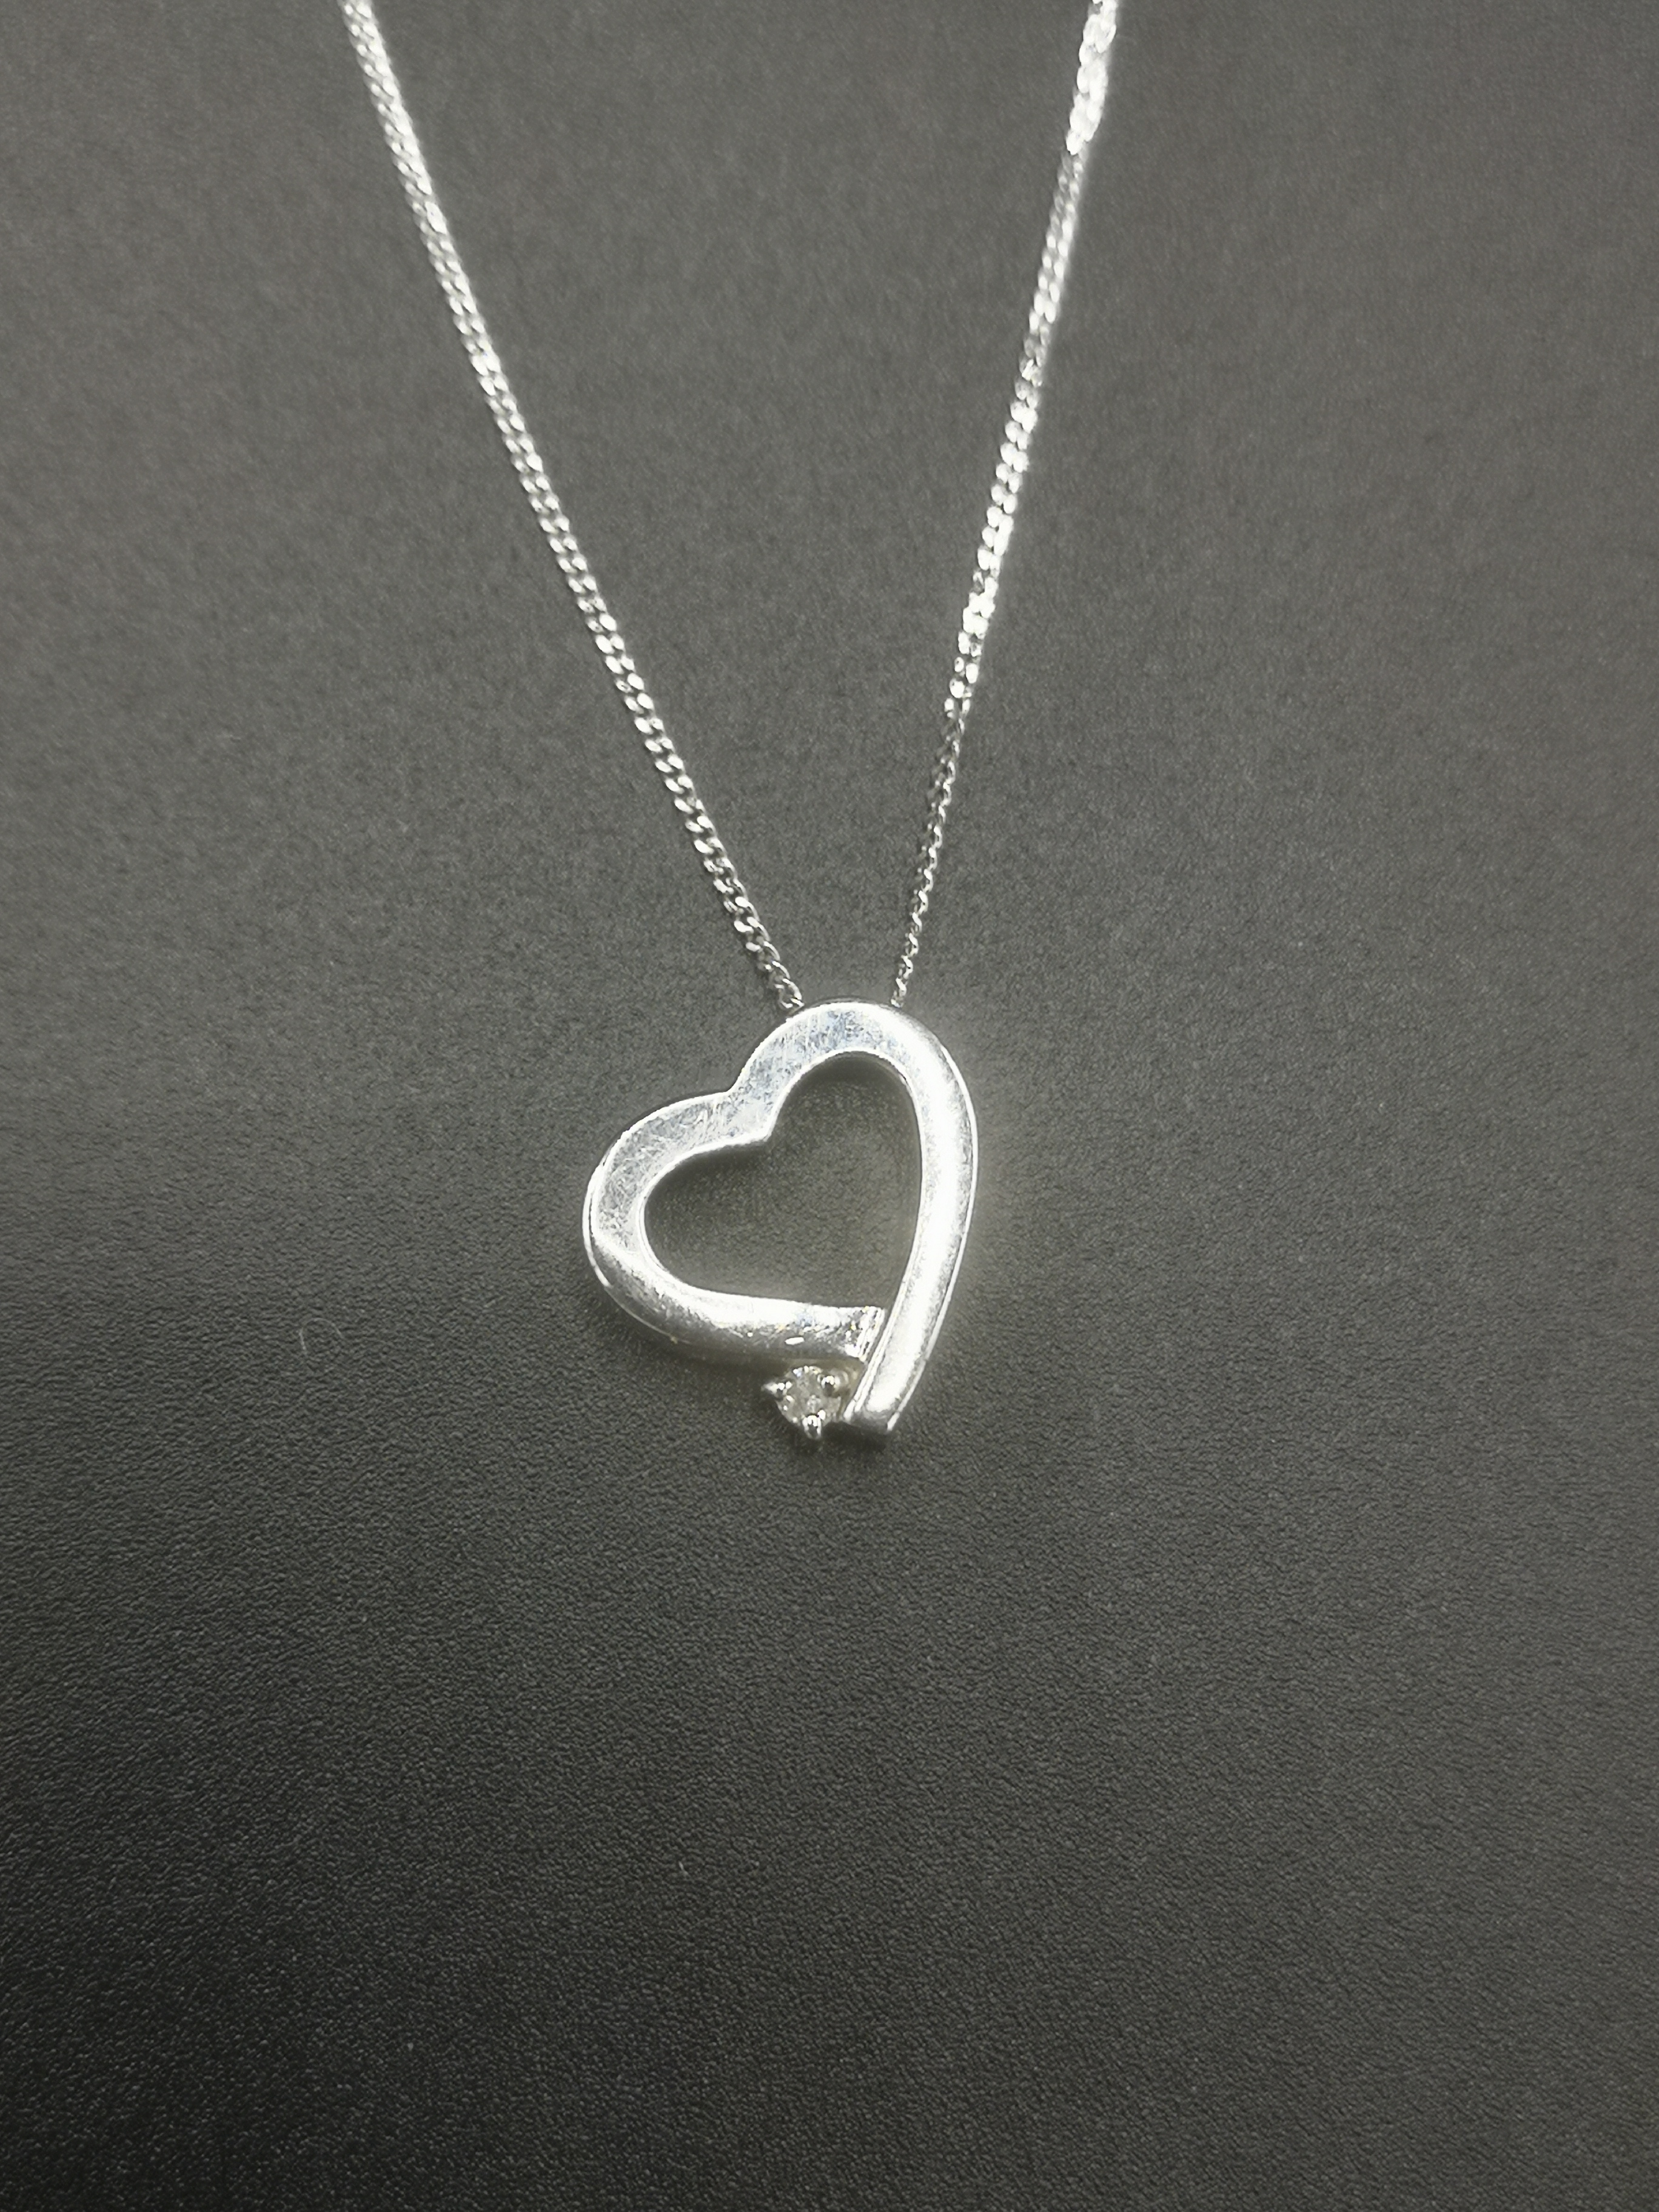 9ct white gold chain and pendant - Image 2 of 6